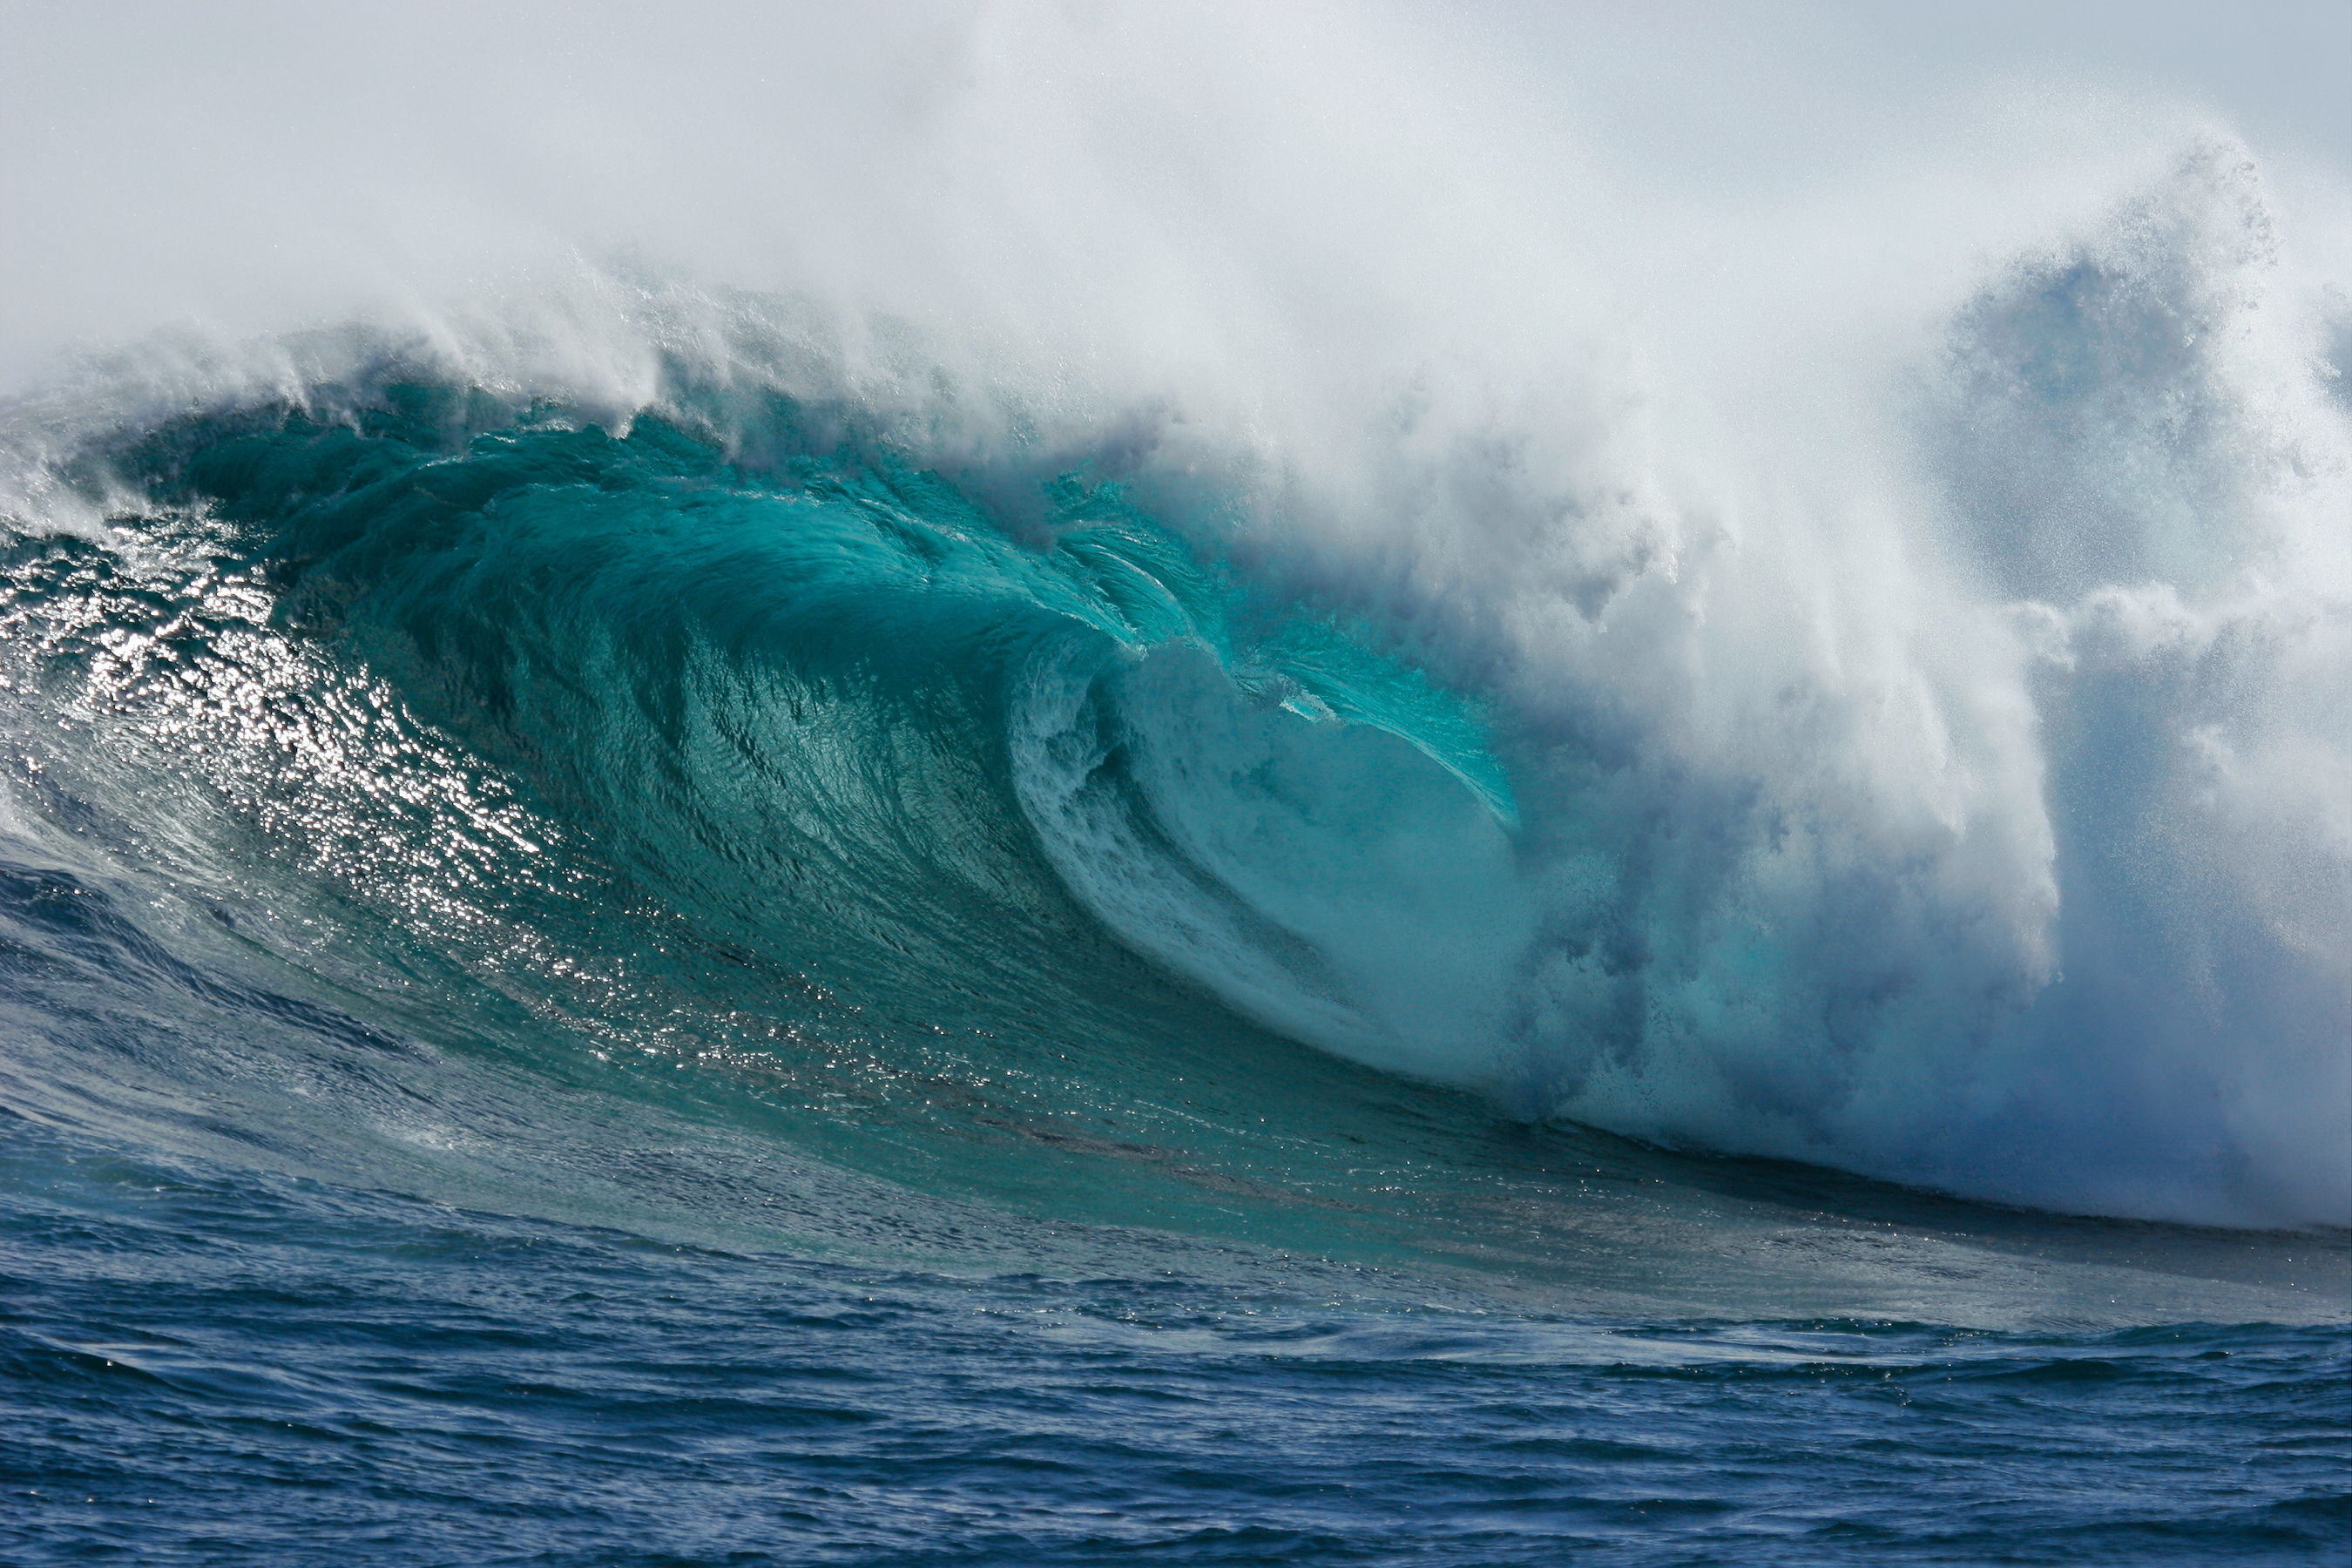 Riding the Waves of Big Data